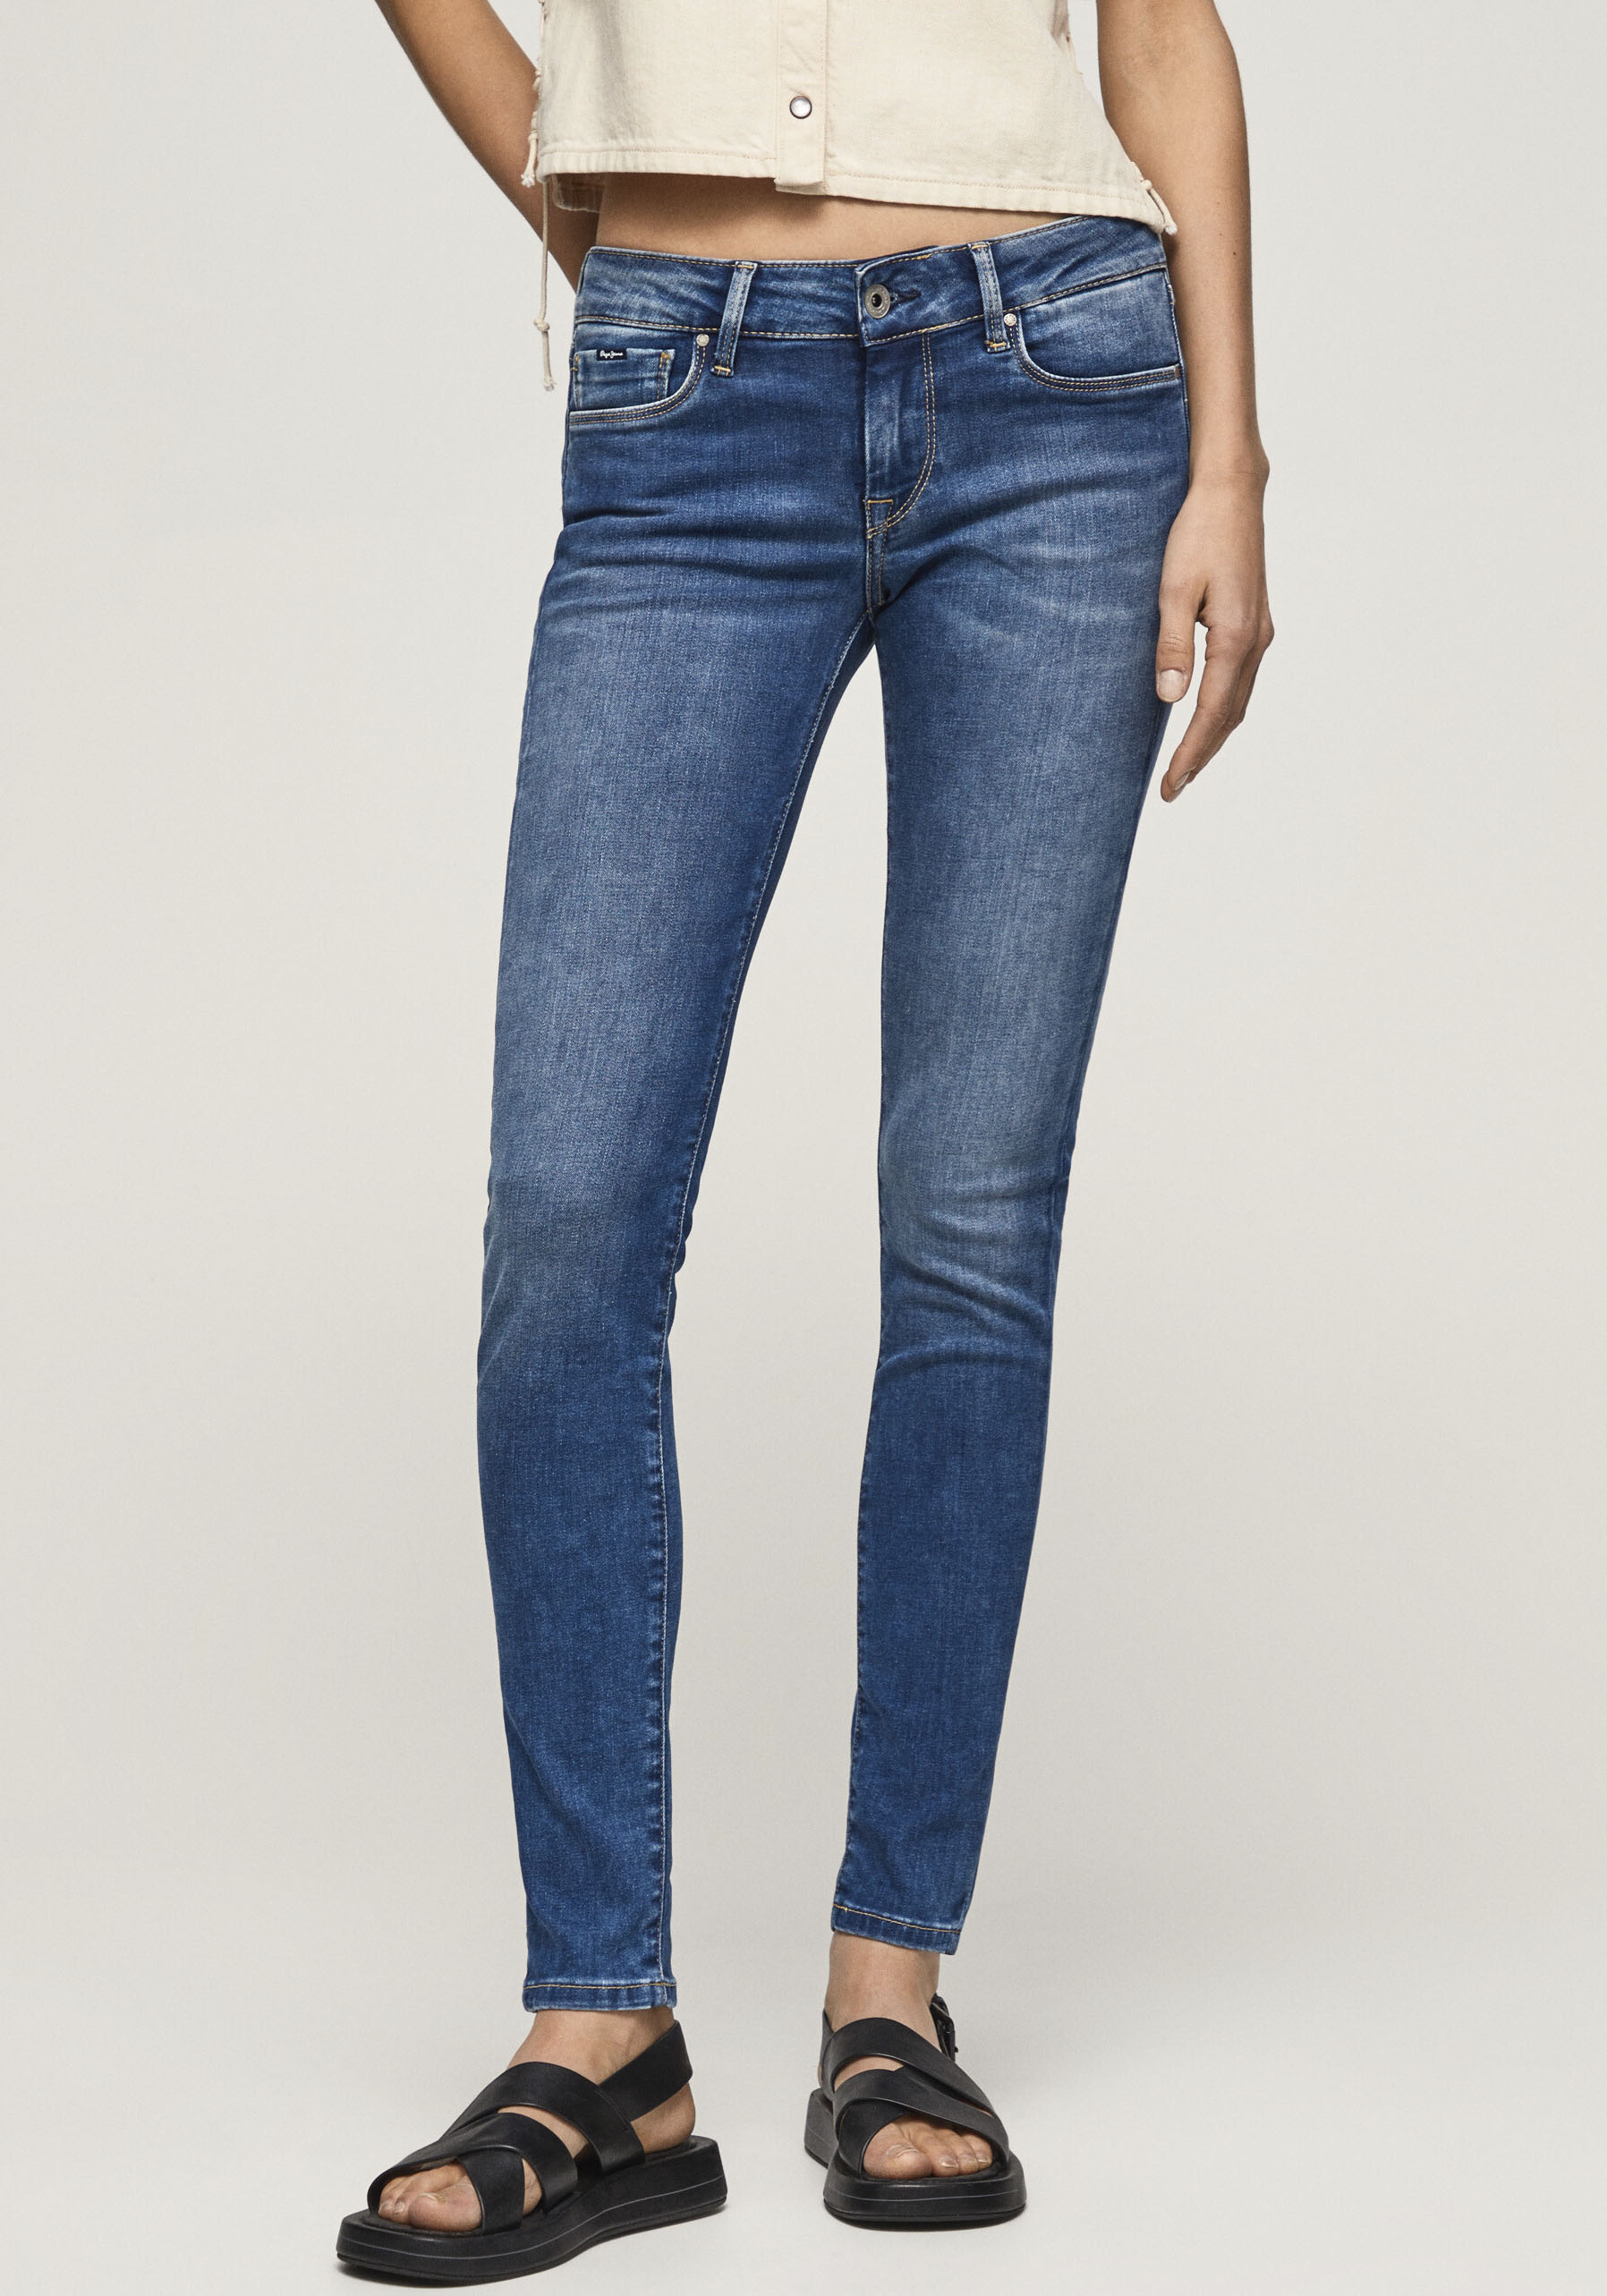 Pepe Jeans Skinny-fit-Jeans »SOHO« von Pepe Jeans